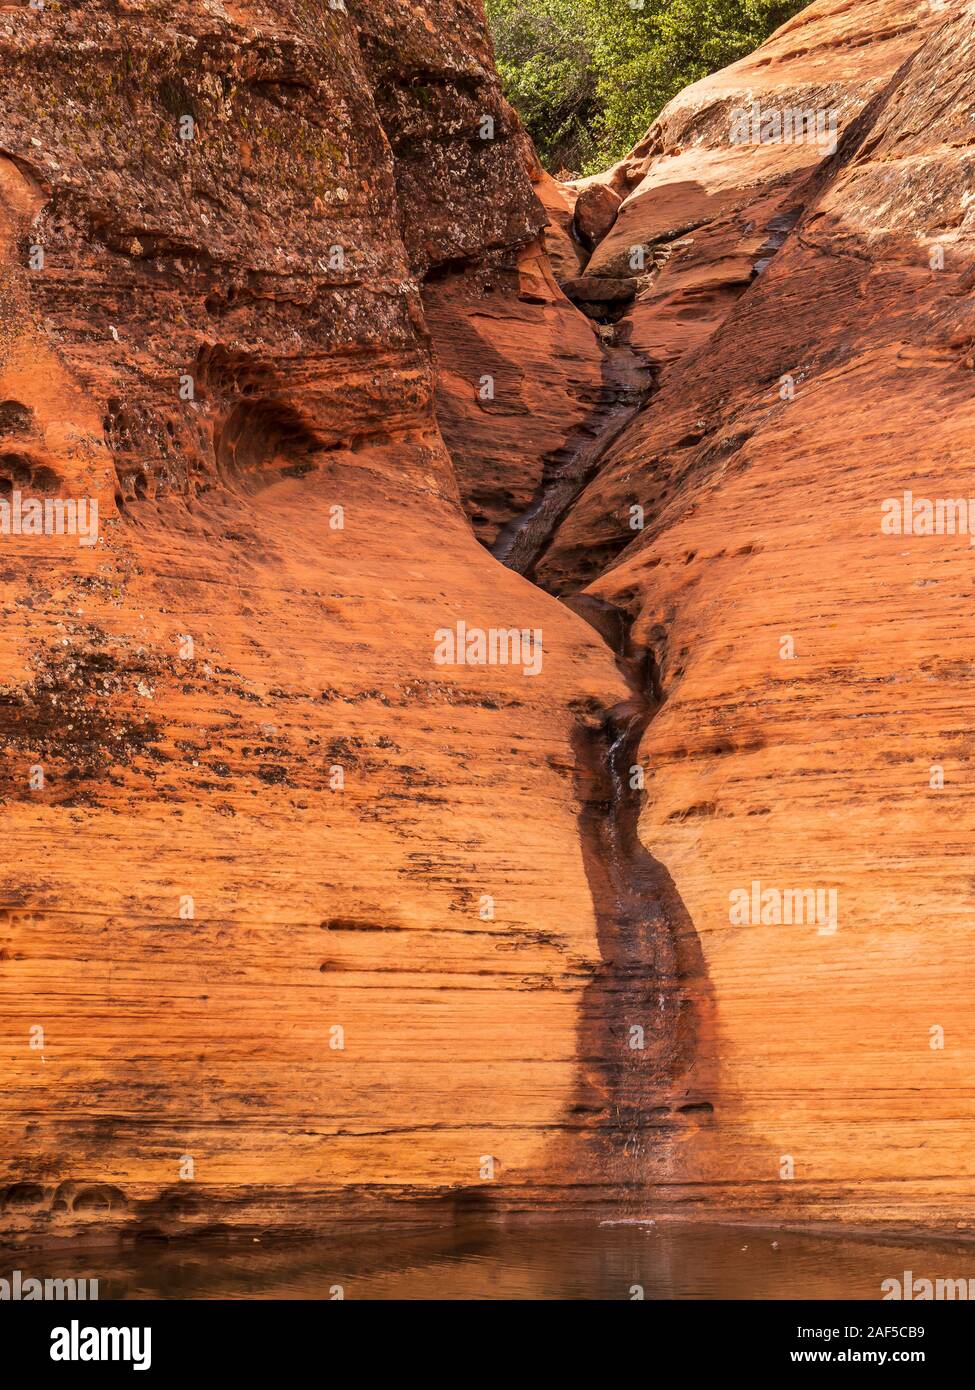 Pool at trail's end, Red Sands Trail, Snow Canyon State Park, St. George, Utah. Stock Photo